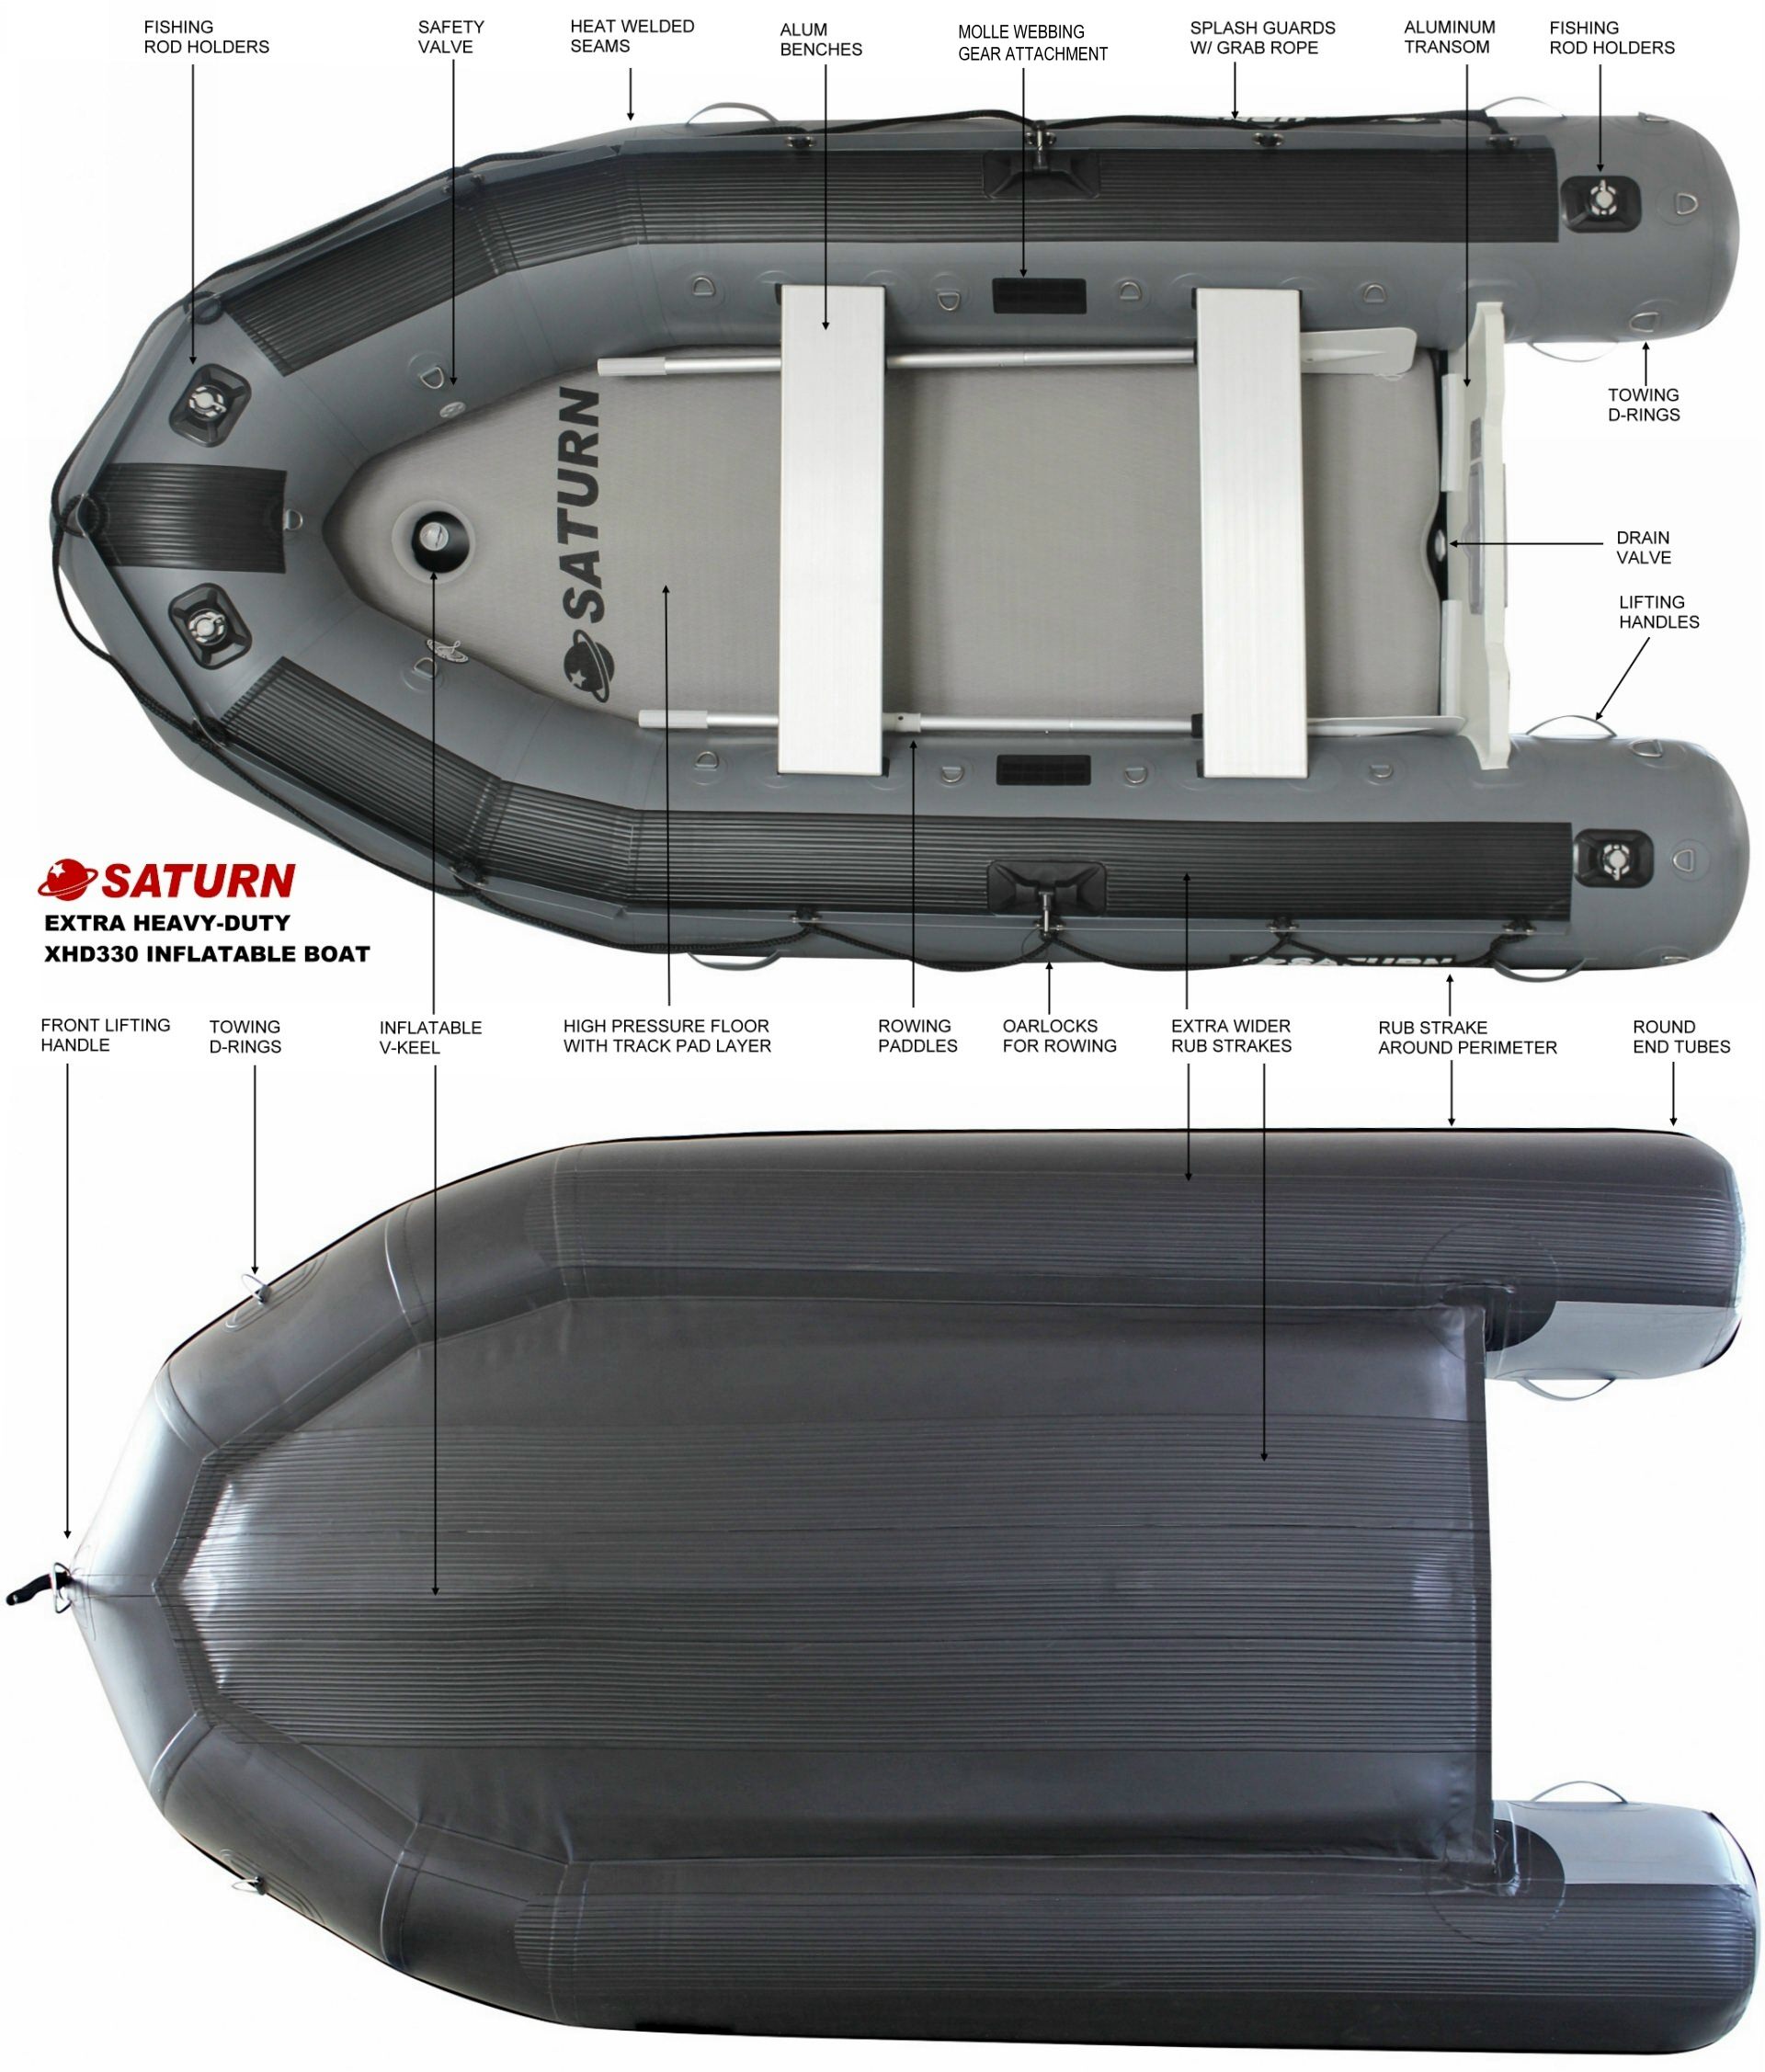 Toughest Inflatable Boats On A Water. Specs for XHD330 Saturn inflatable boat.